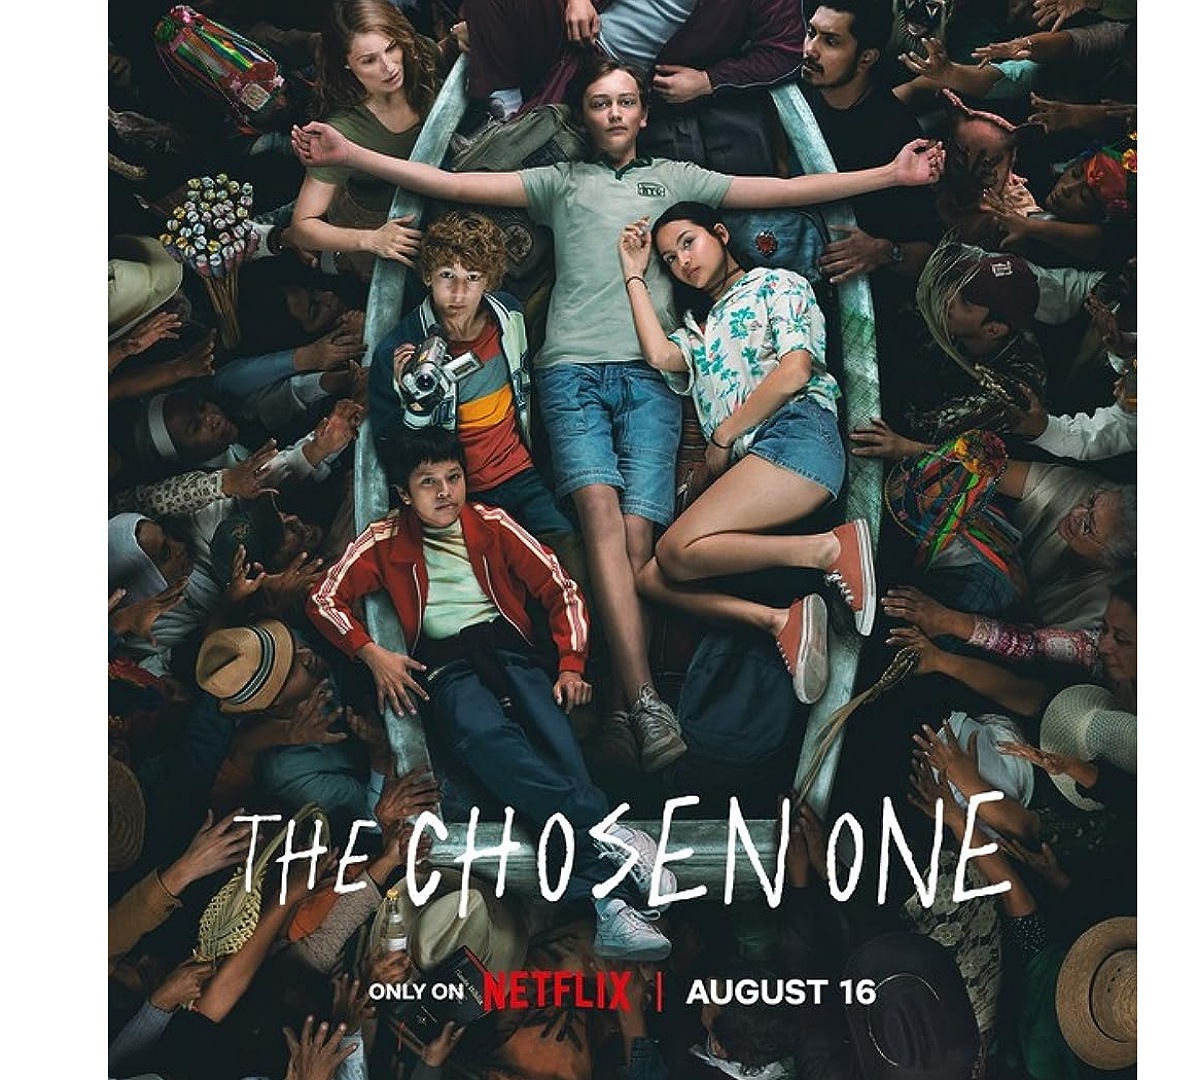 The Chosen One: Release Date, Trailer, plot & more